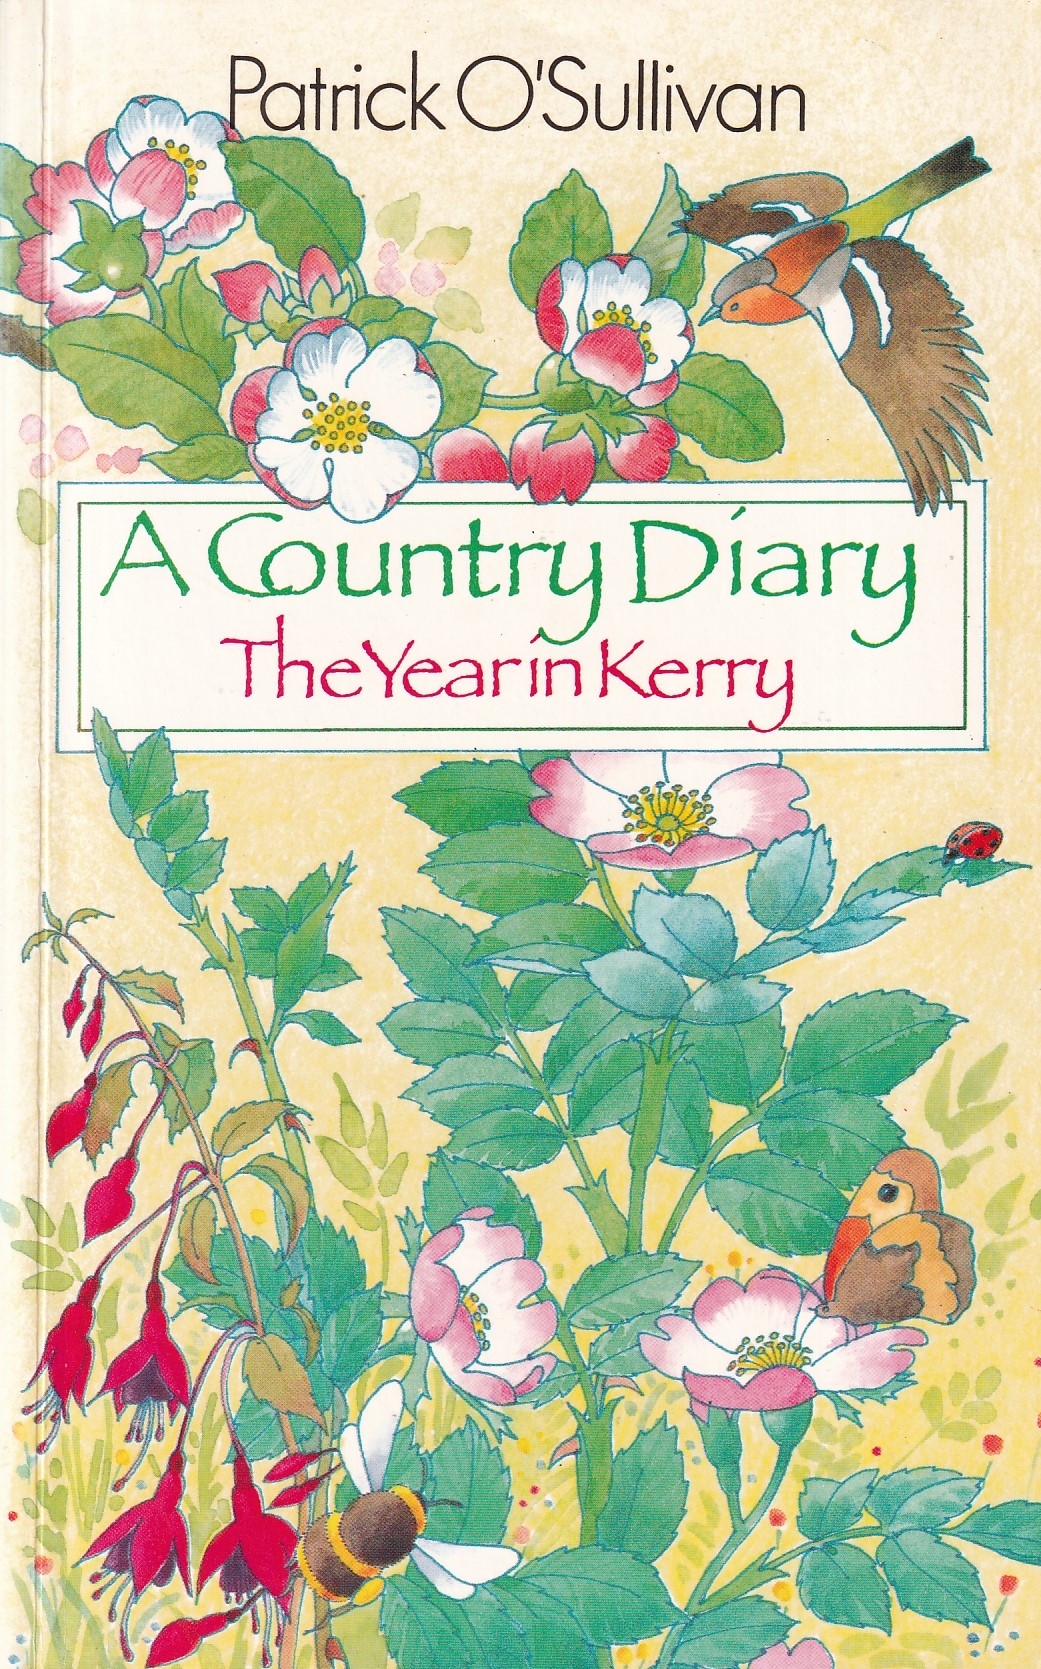 A Country Diary: The Year in Kerry | Patrick O'Sullivan | Charlie Byrne's